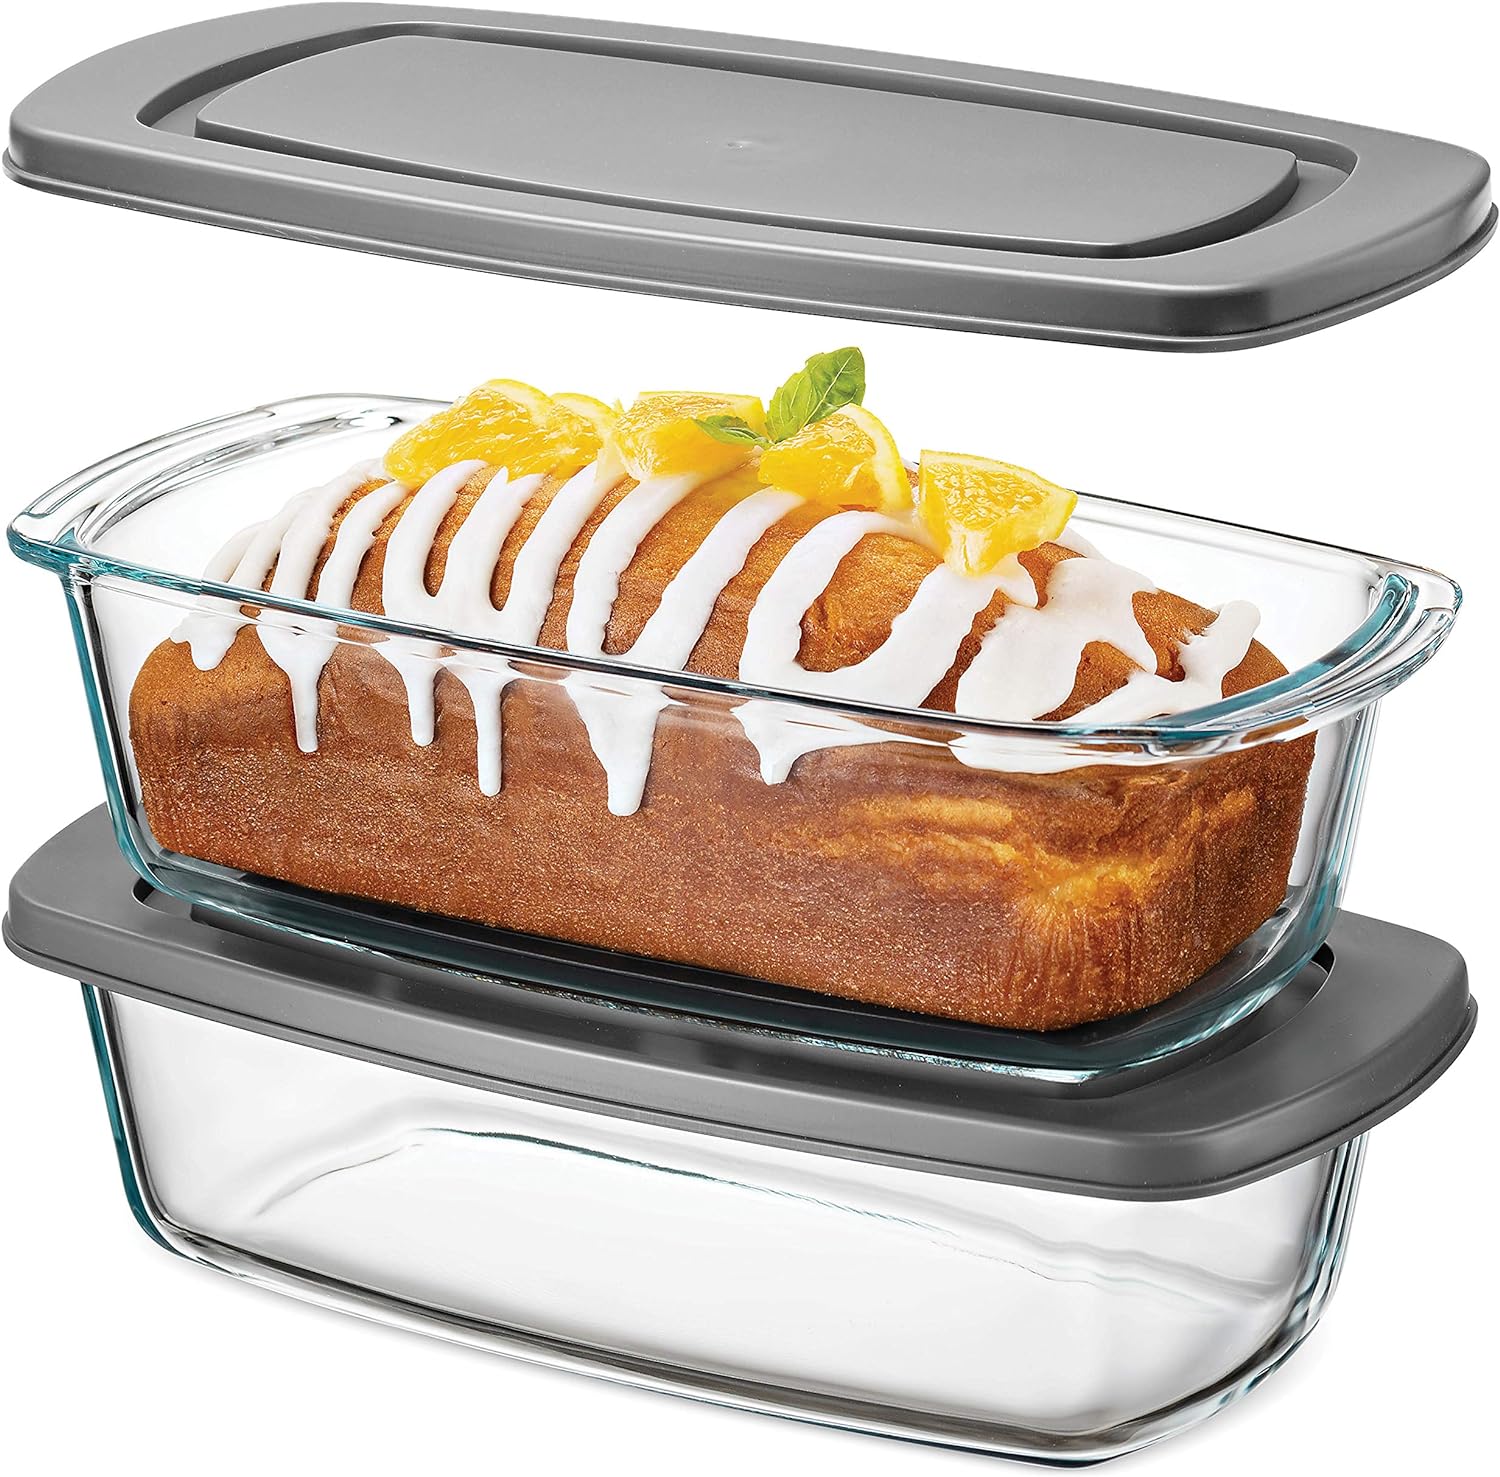 FineDine Glass Loaf Baking Pan with Lid - 2-Pack with BPA-free Airtight Lids - Perfect for Baking Bread, Meatloaf, and More, Gray